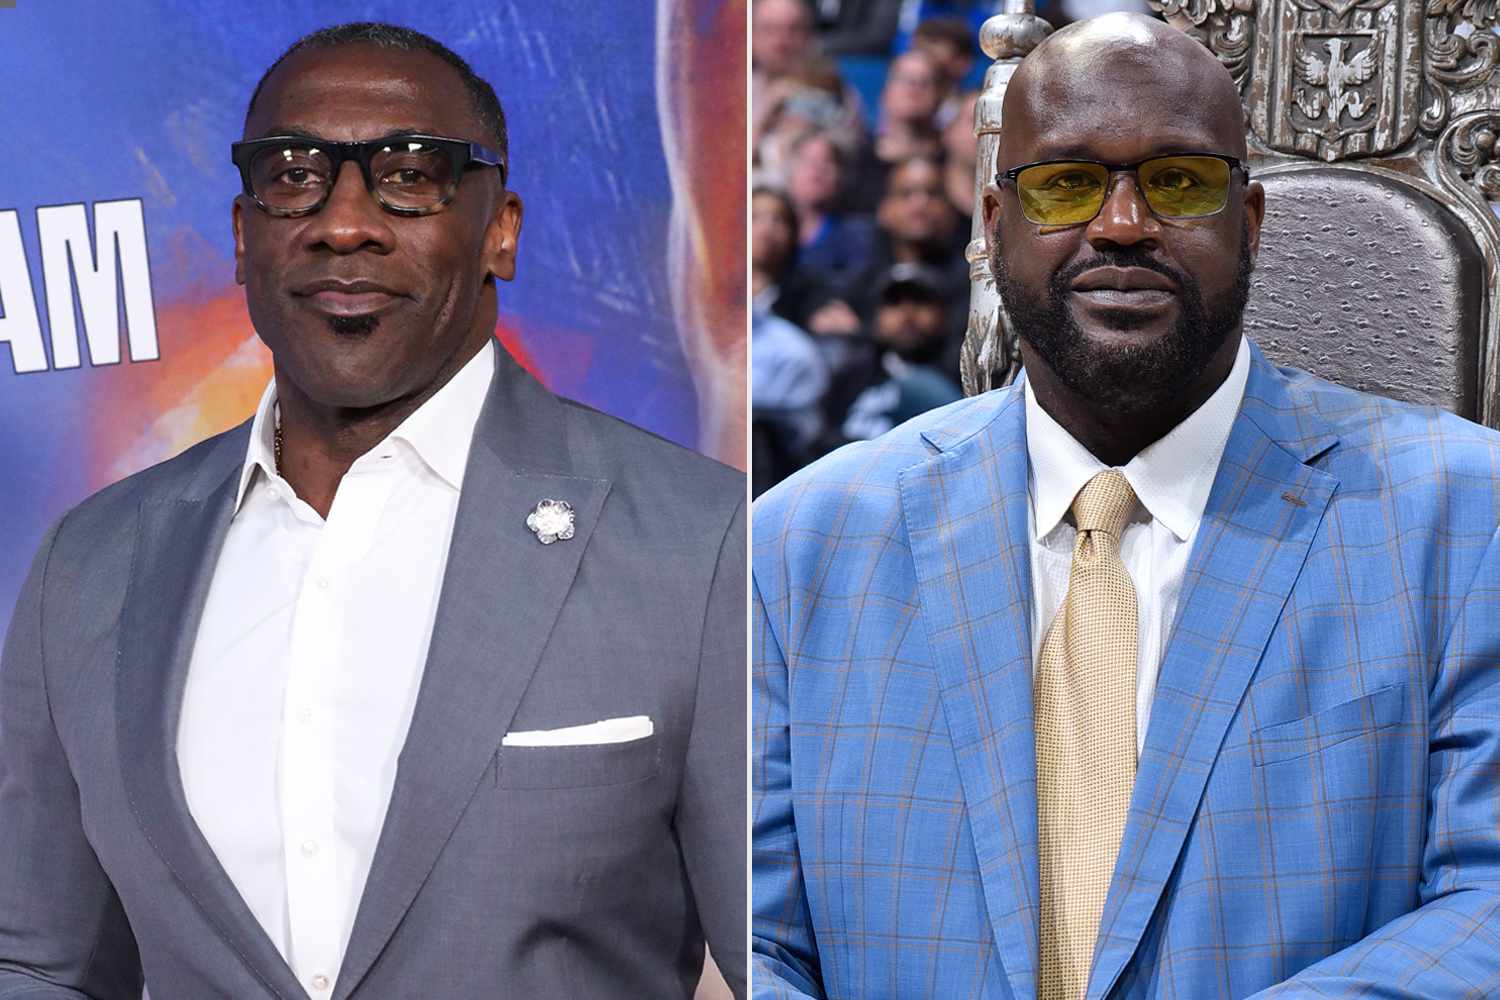 Shannon Sharpe Addresses His Ongoing Feud with Shaquille O’Neal: 'I'm Ready to Move On' (Exclusive)